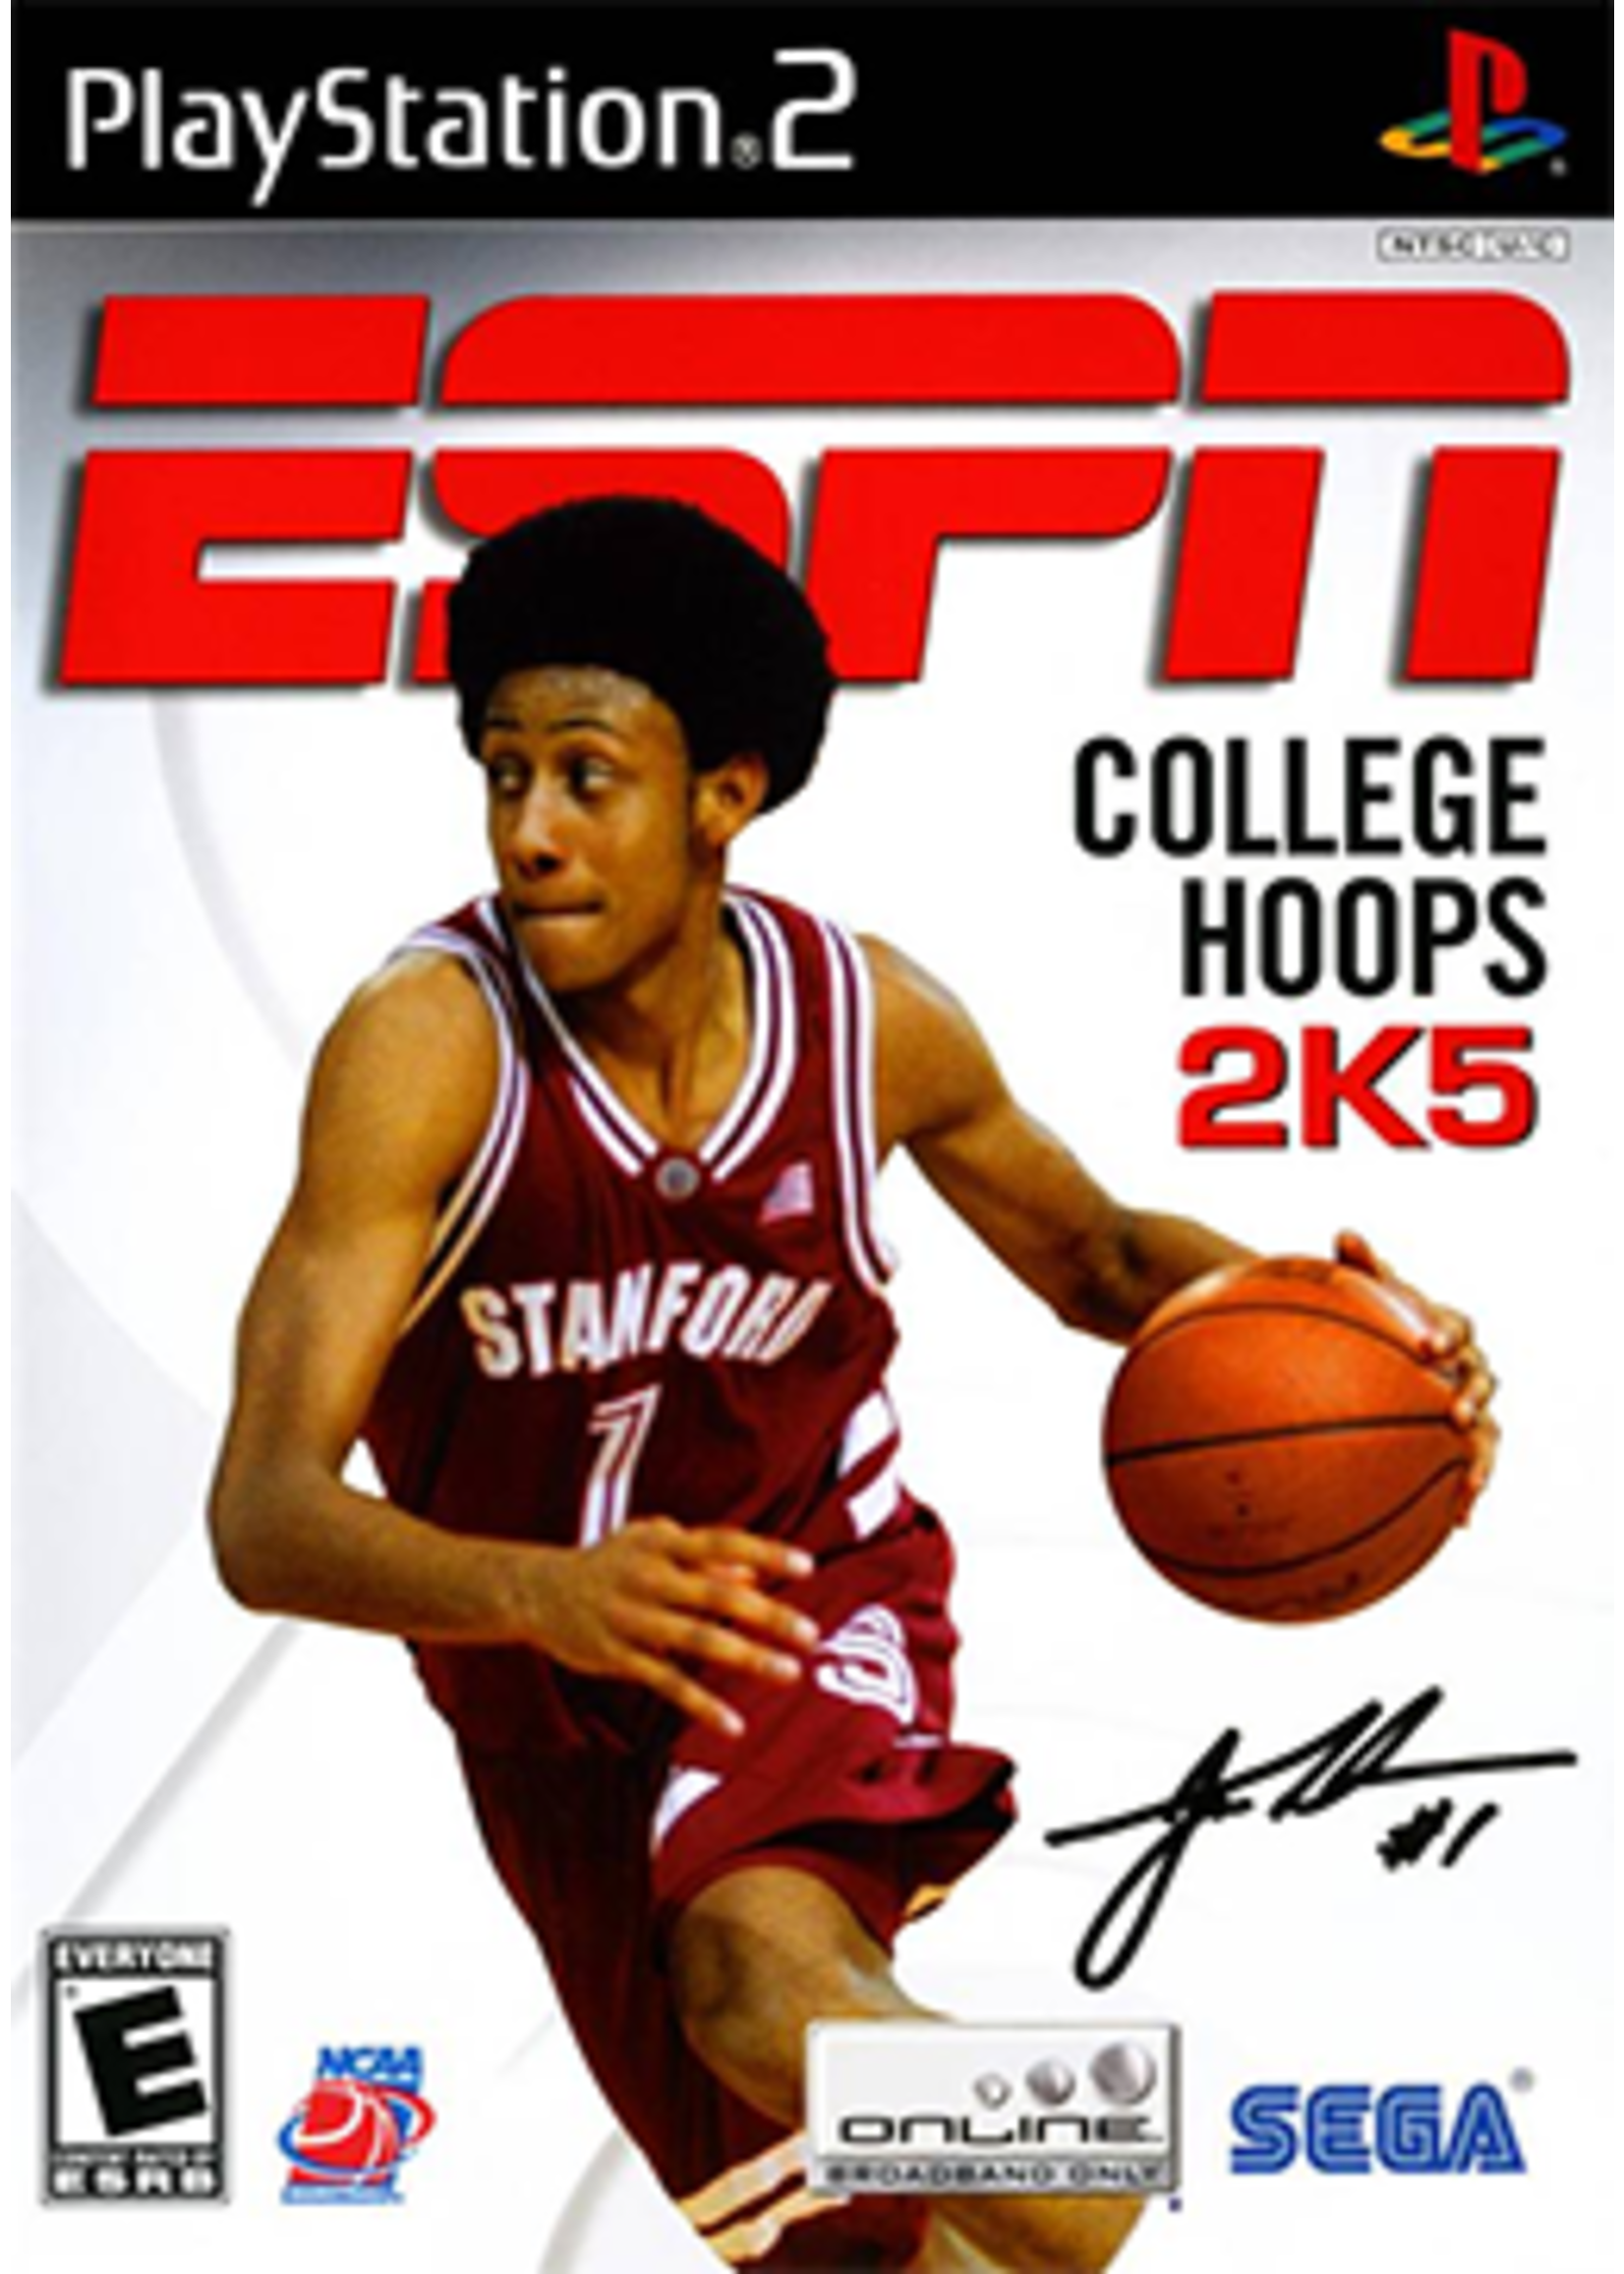 Sony Playstation 2 (PS2) ESPN College Hoops 2K5